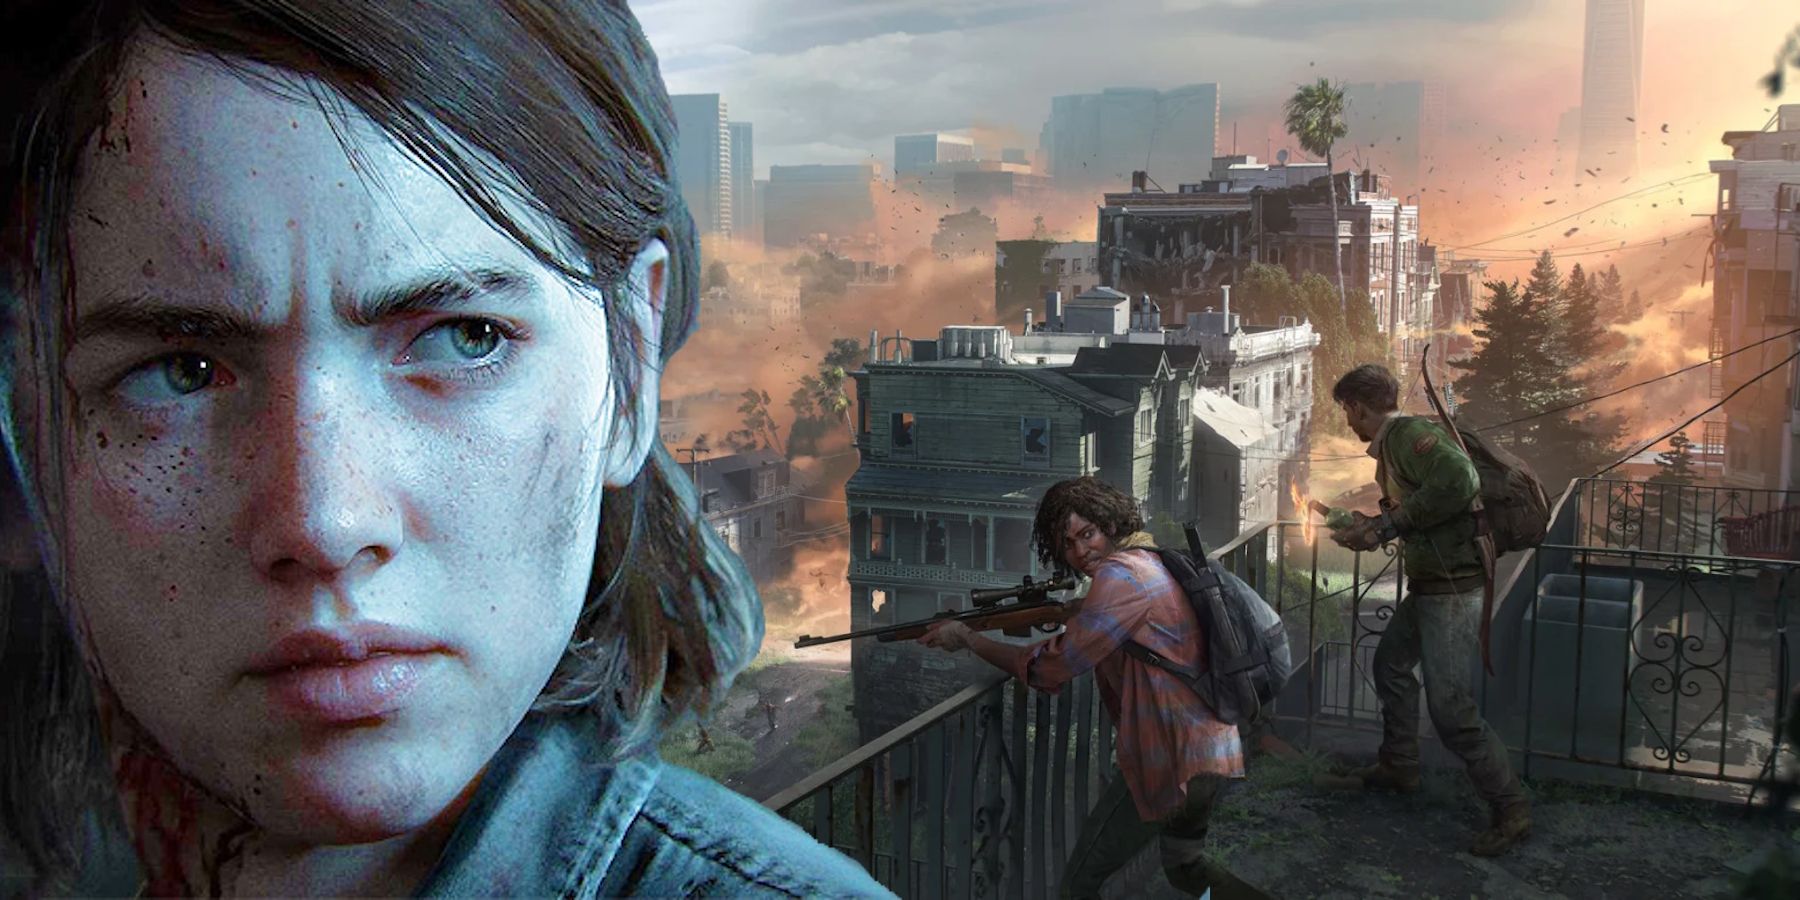 The Last of Us multiplayer screenshot overlaid with Ellie